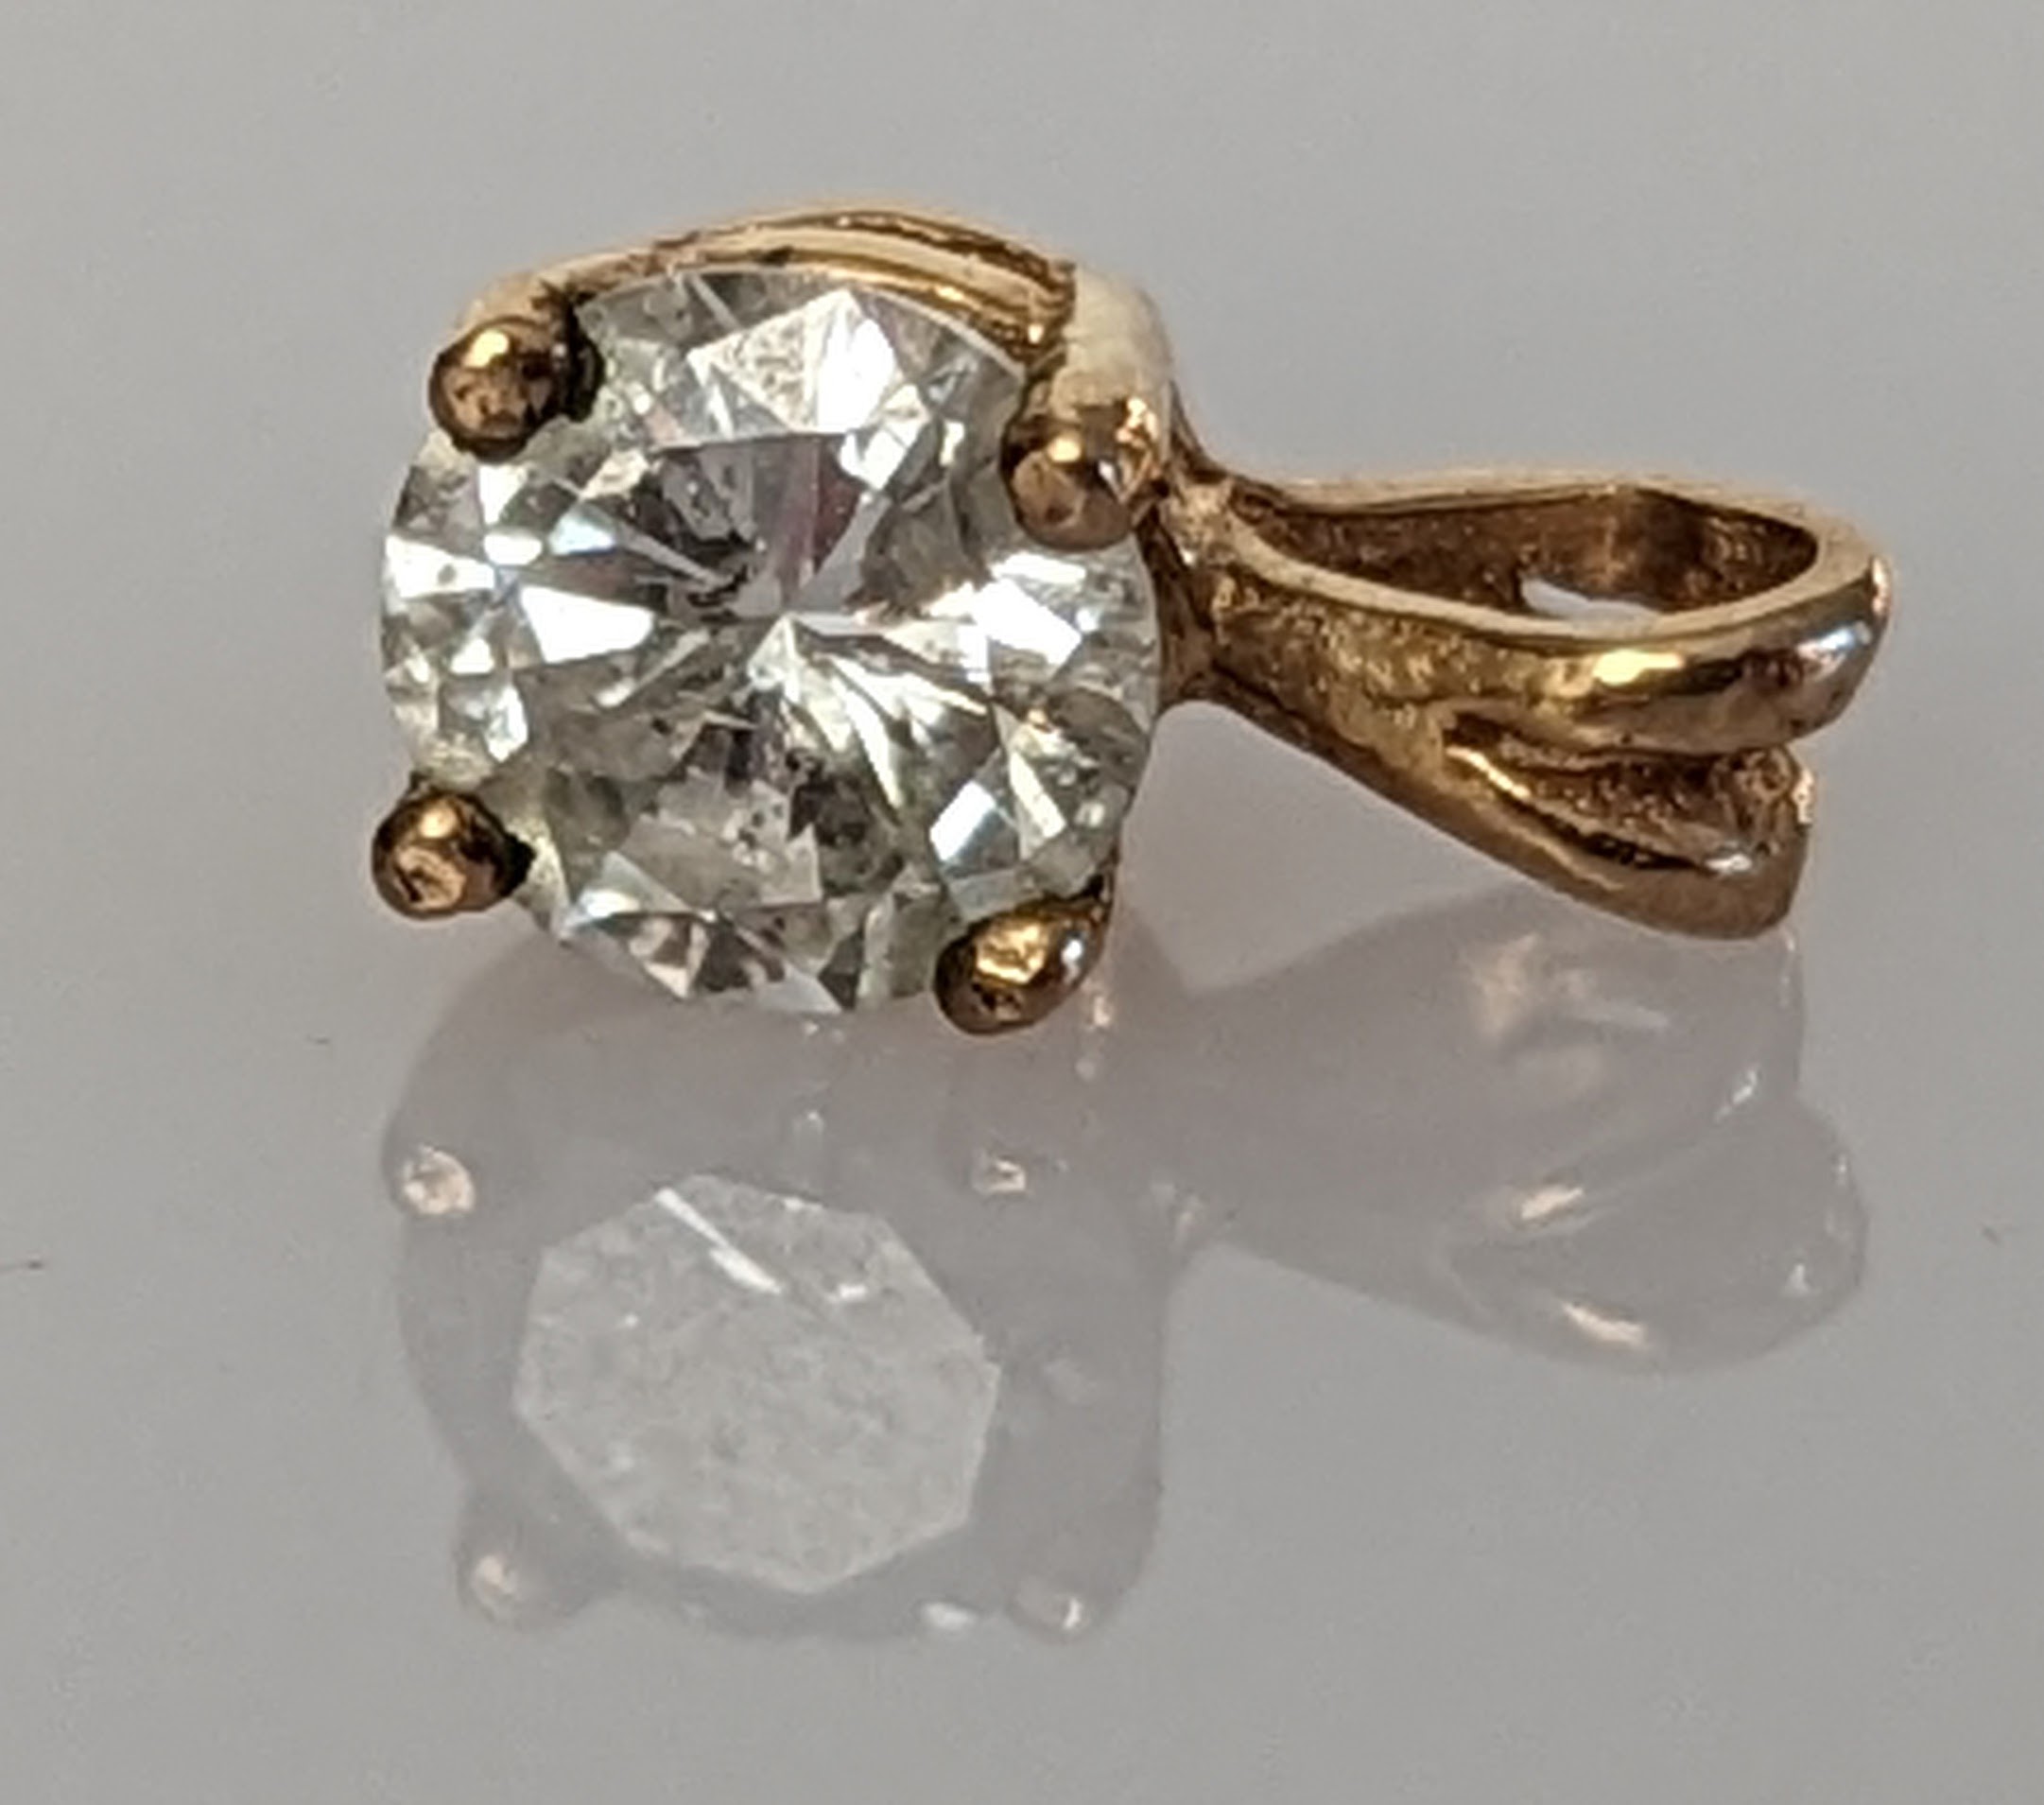 A solitaire diamond ring with split shoulder shank, decorated with diamonds to both sides - Image 6 of 8